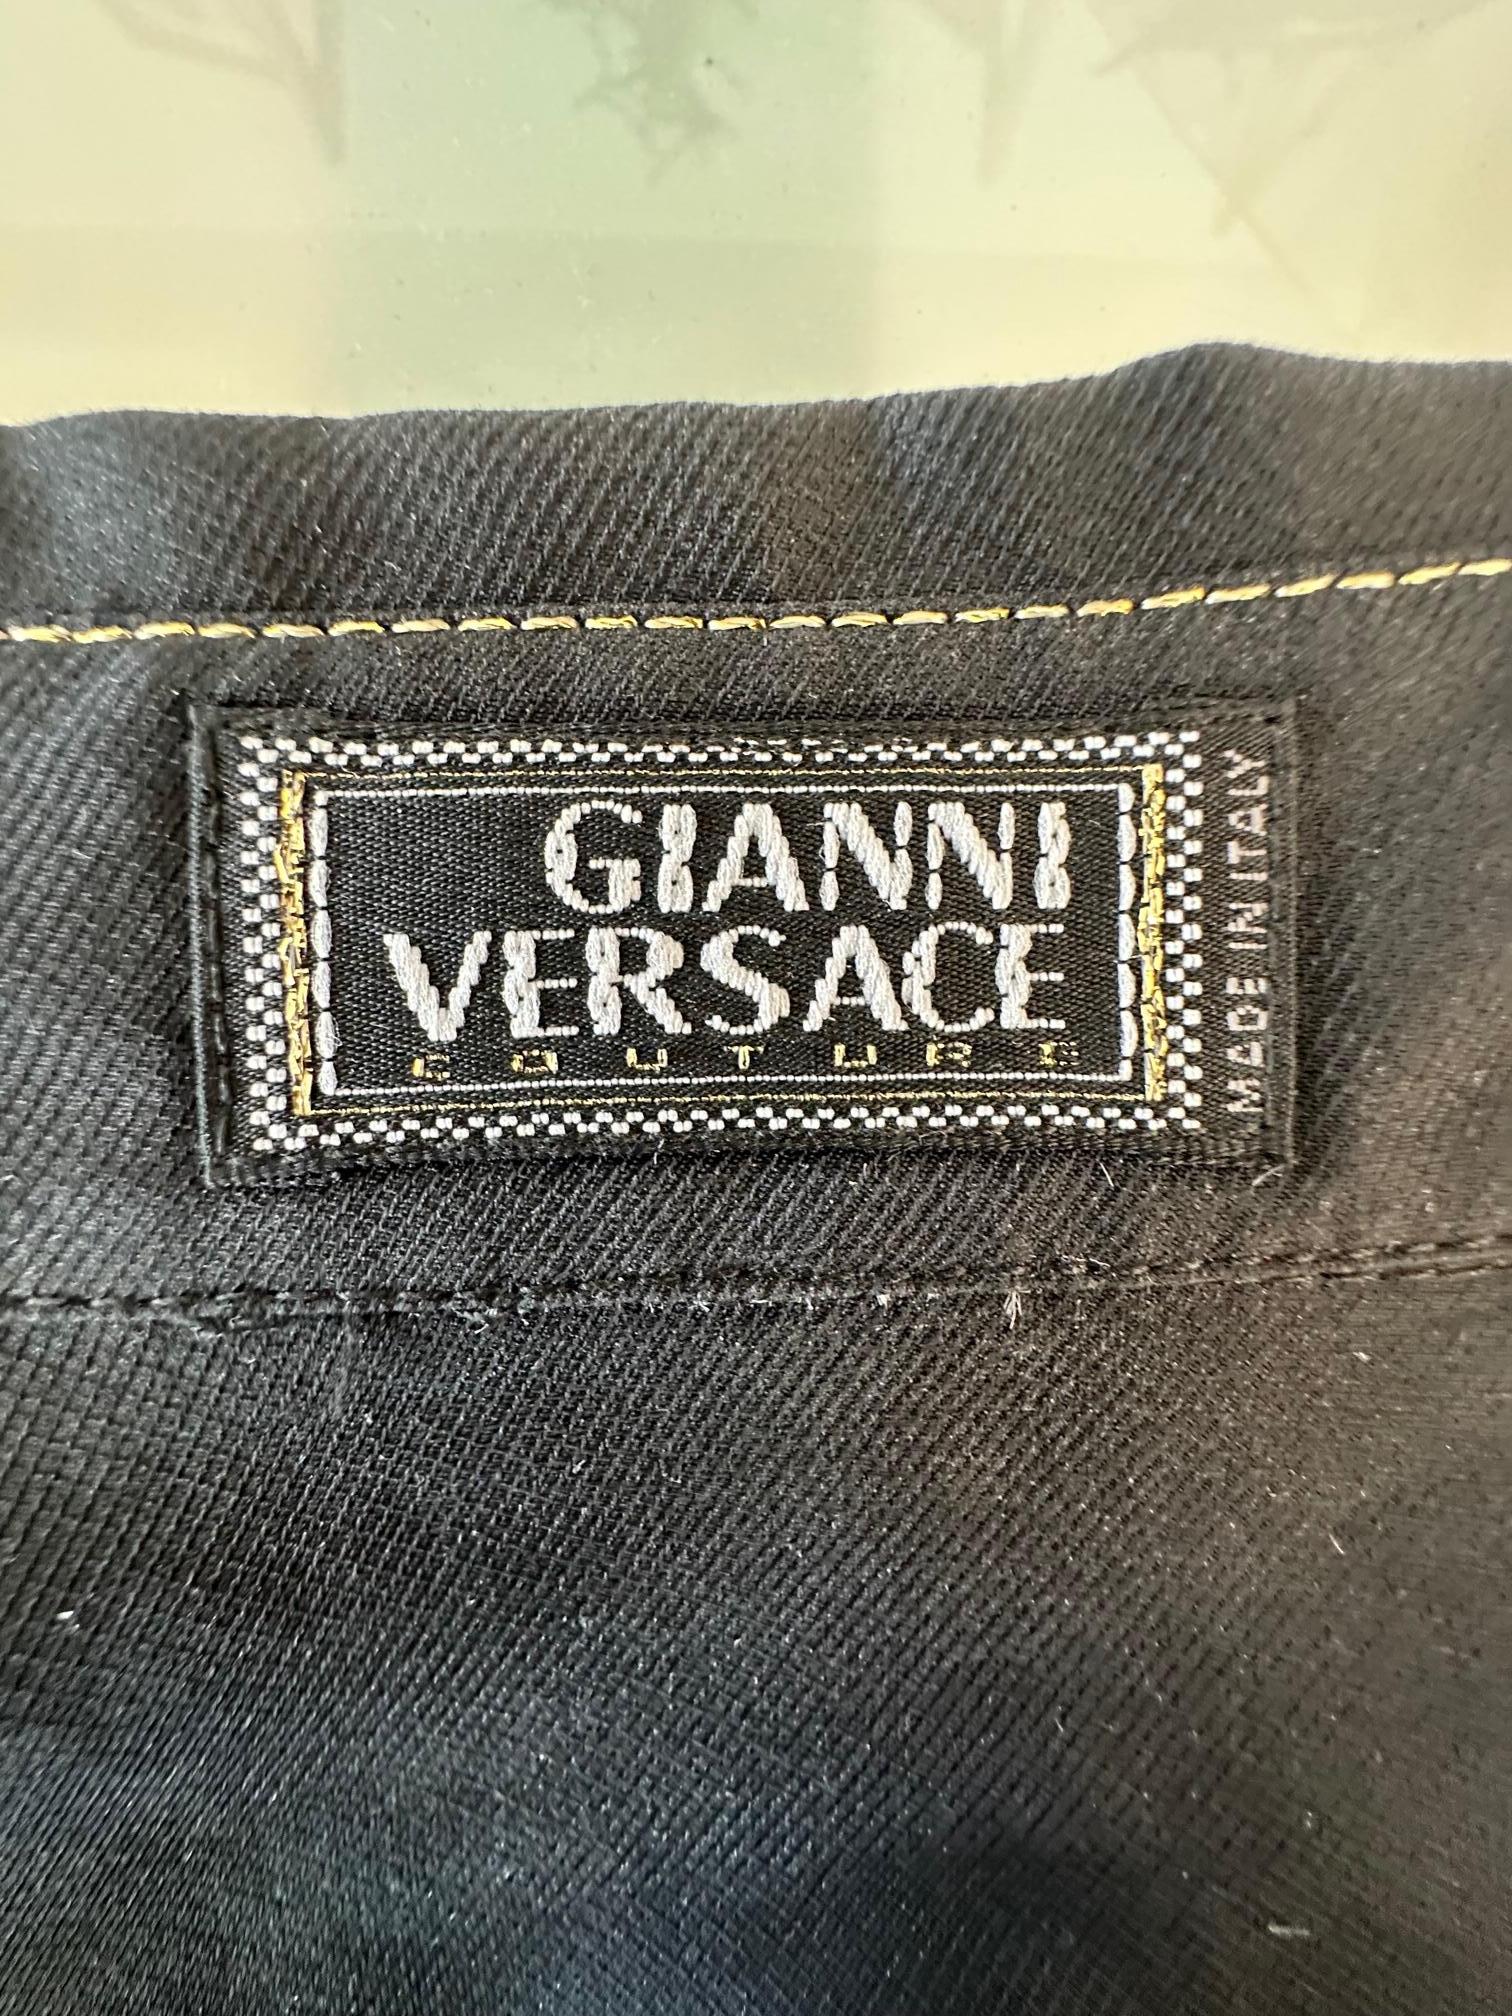 Gianni Versace Couture camicia vintage 2000 For Sale 3